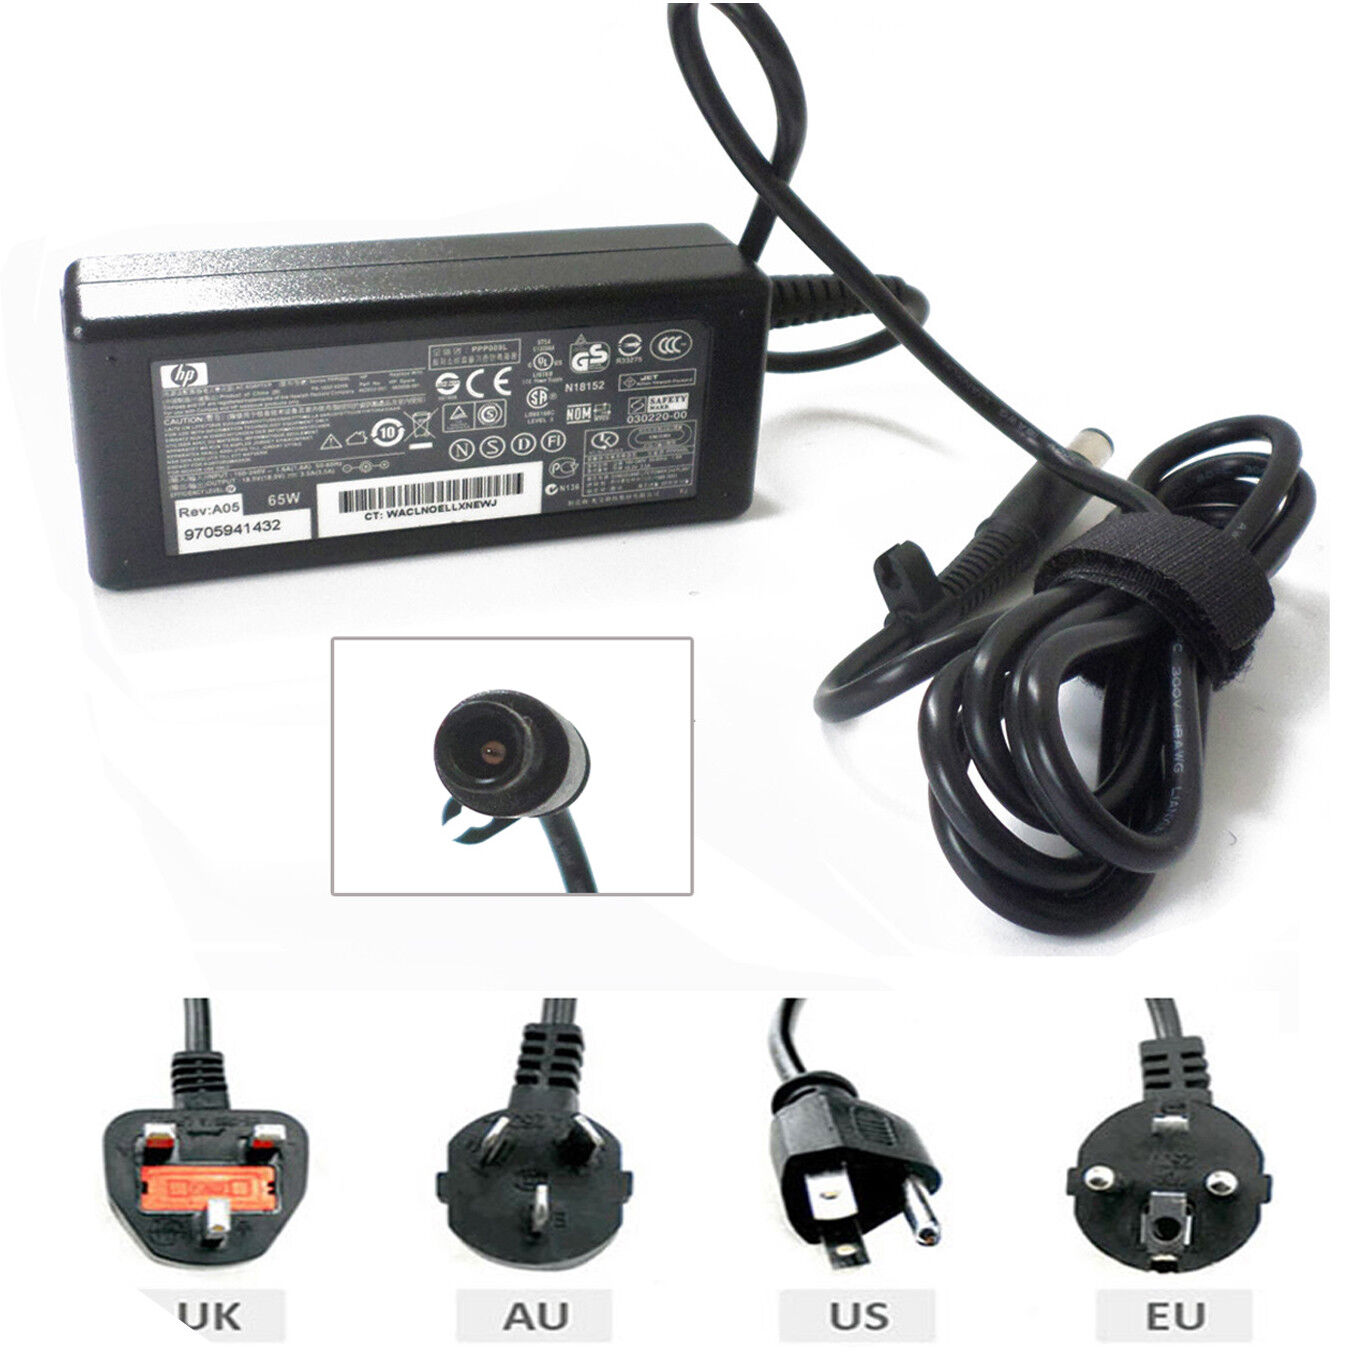 Genuine AC Adapter For HP N193 R33030 2000-329WM 2000-299WM Power Supply Charger